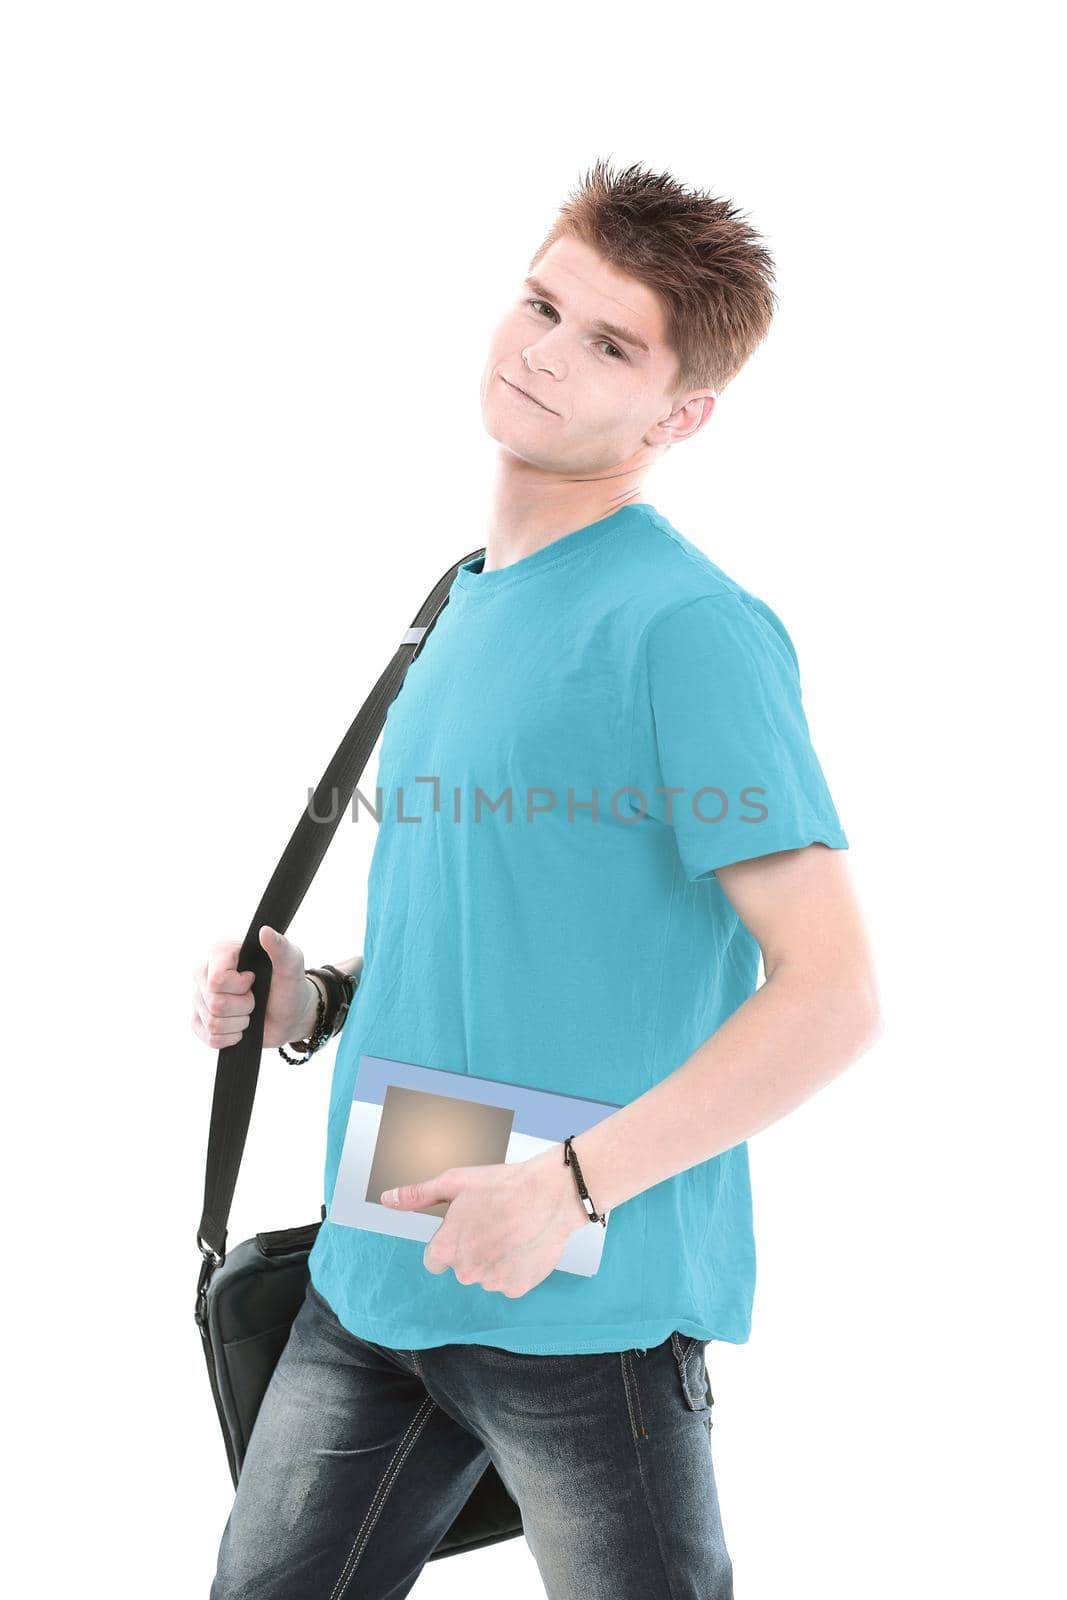 student with book and bag with the laptop. by SmartPhotoLab